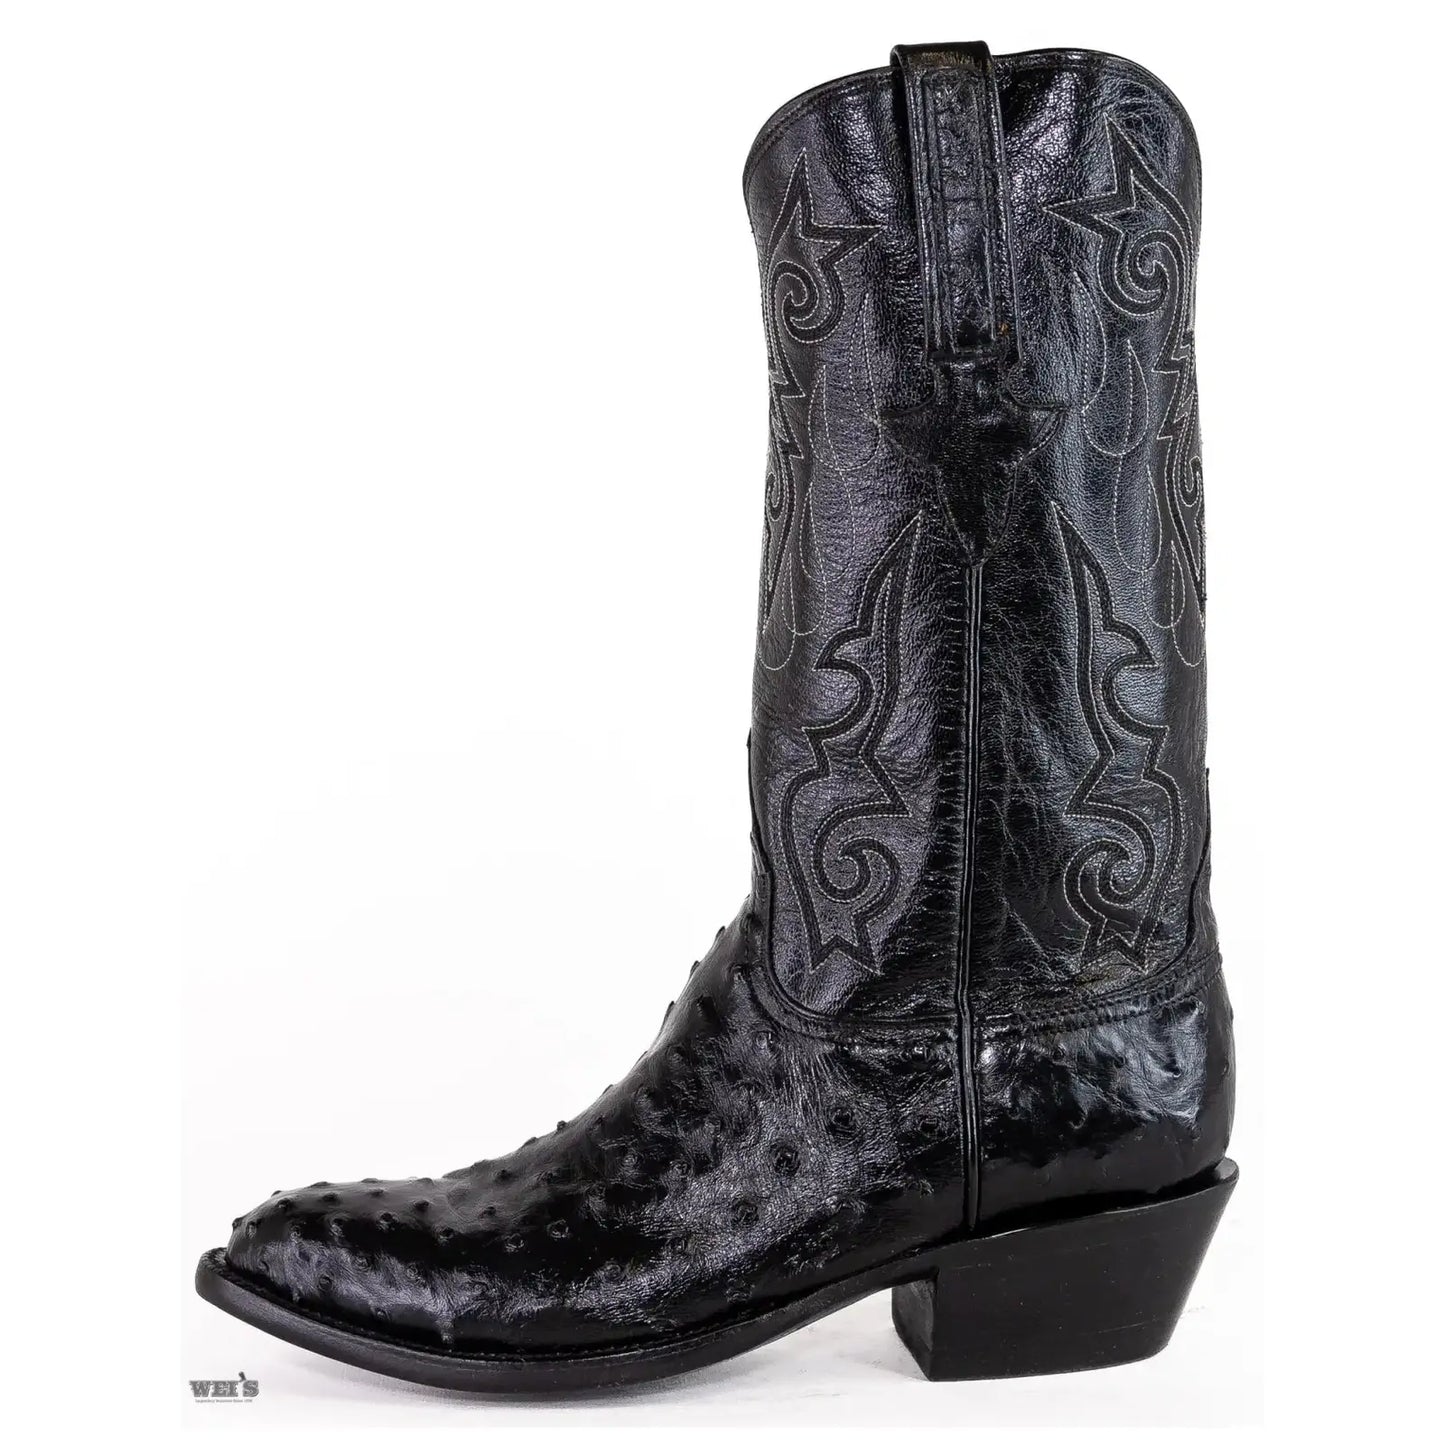 Lucchese Men's Cowboy Boots 13" Exotic Ostrich Medium Round Toe E2018.64